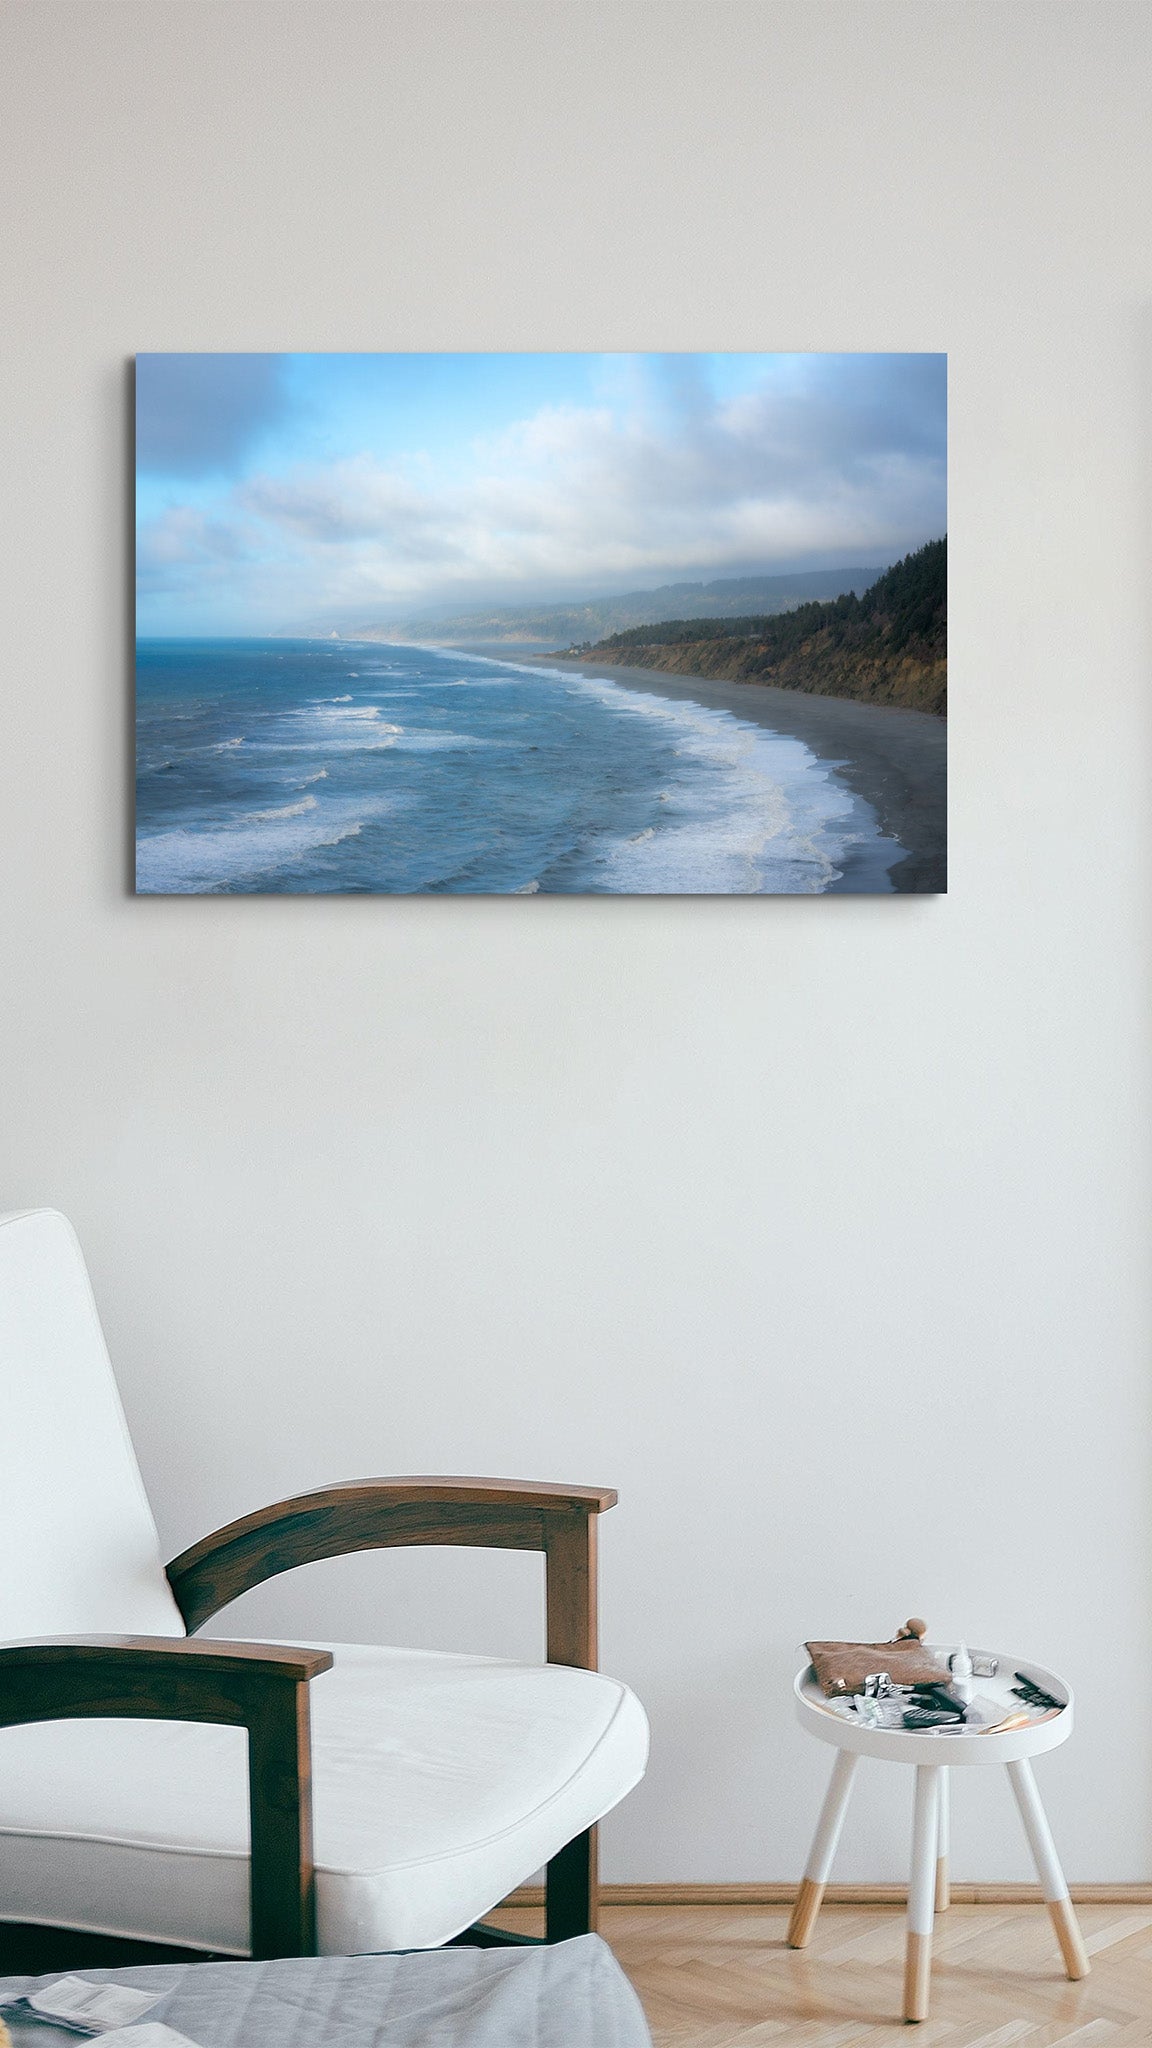 Picture hanging on the wall of a room over a chair. The picture is a fine art landscape photograph titled "Coastal Tide" by Cameron Dreaux of Dreaux Fine Art.